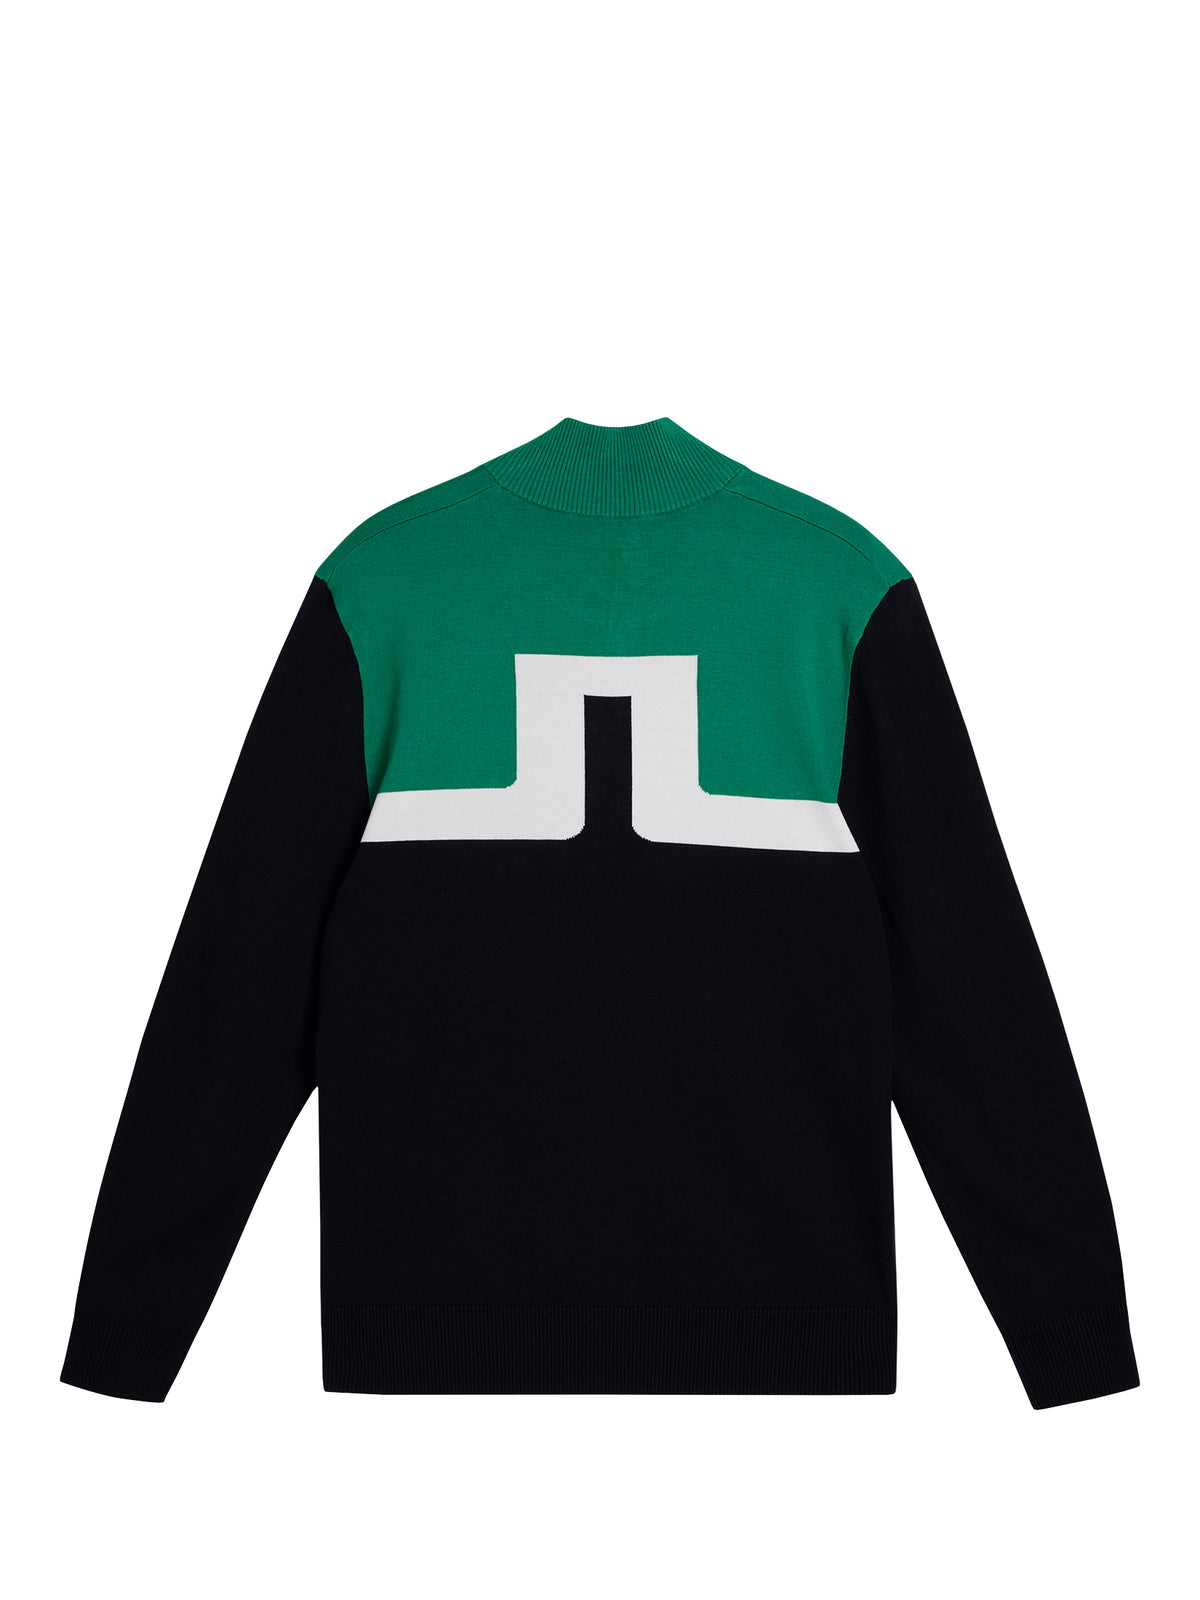 Jeff Knitted Sweater / Black